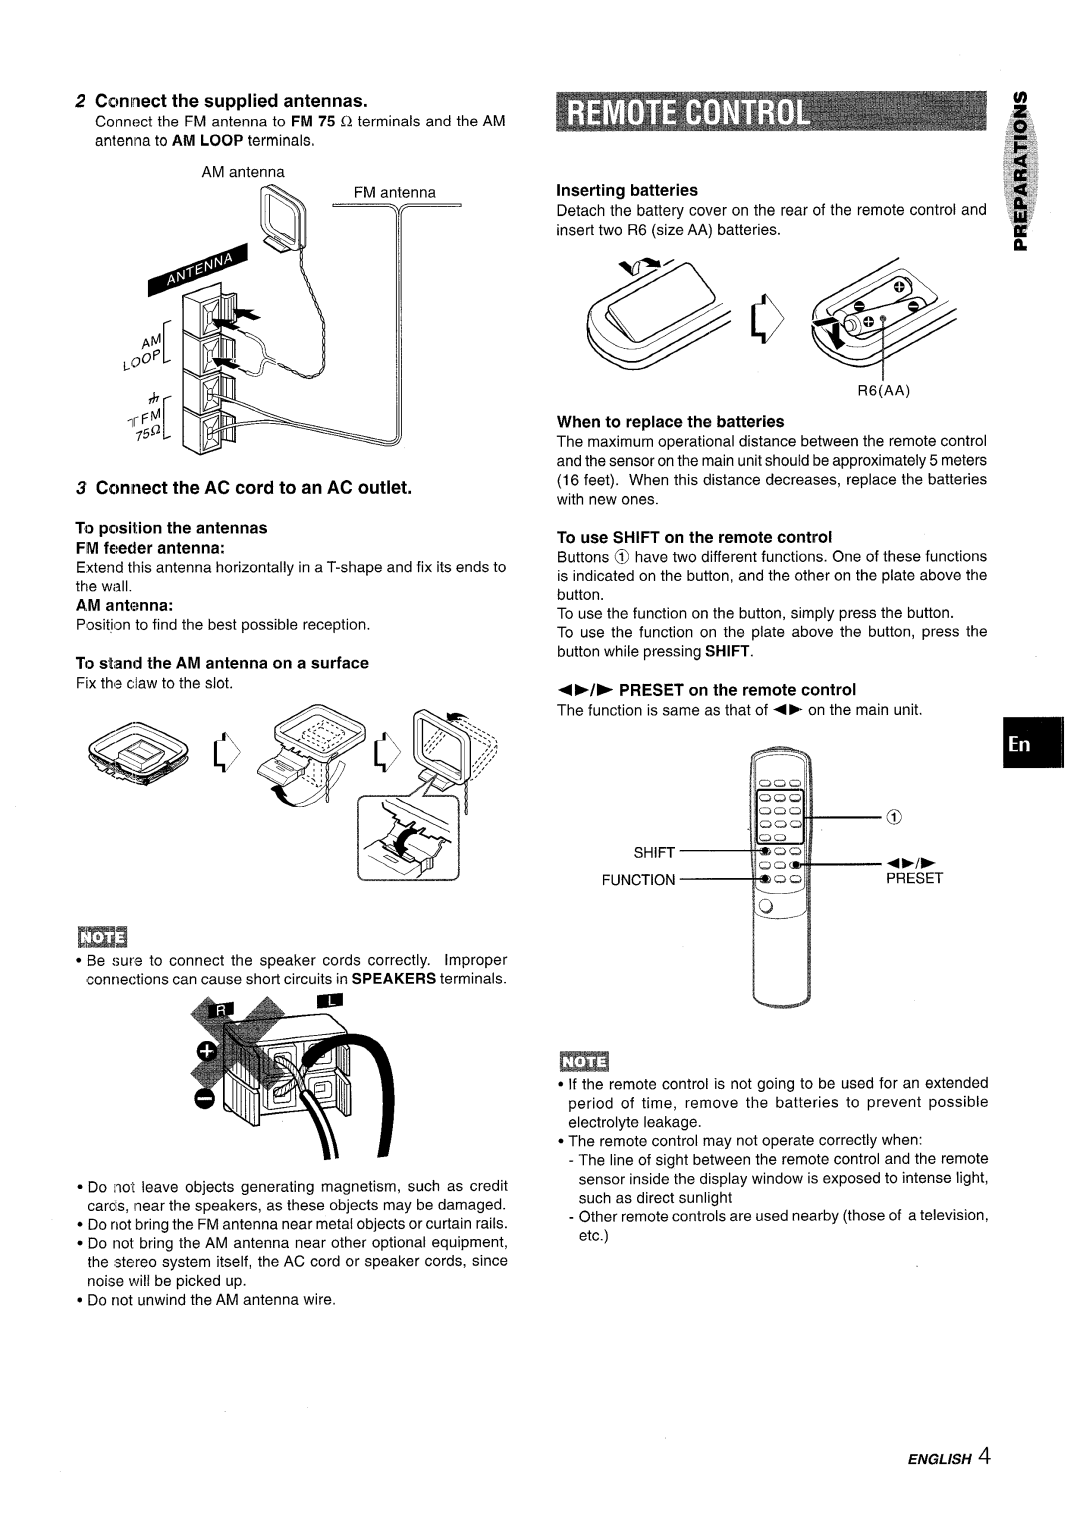 Sony NSX-A707 manual Wllll Ill, ~oop, Connect the AC cord to an AC outlet, English 